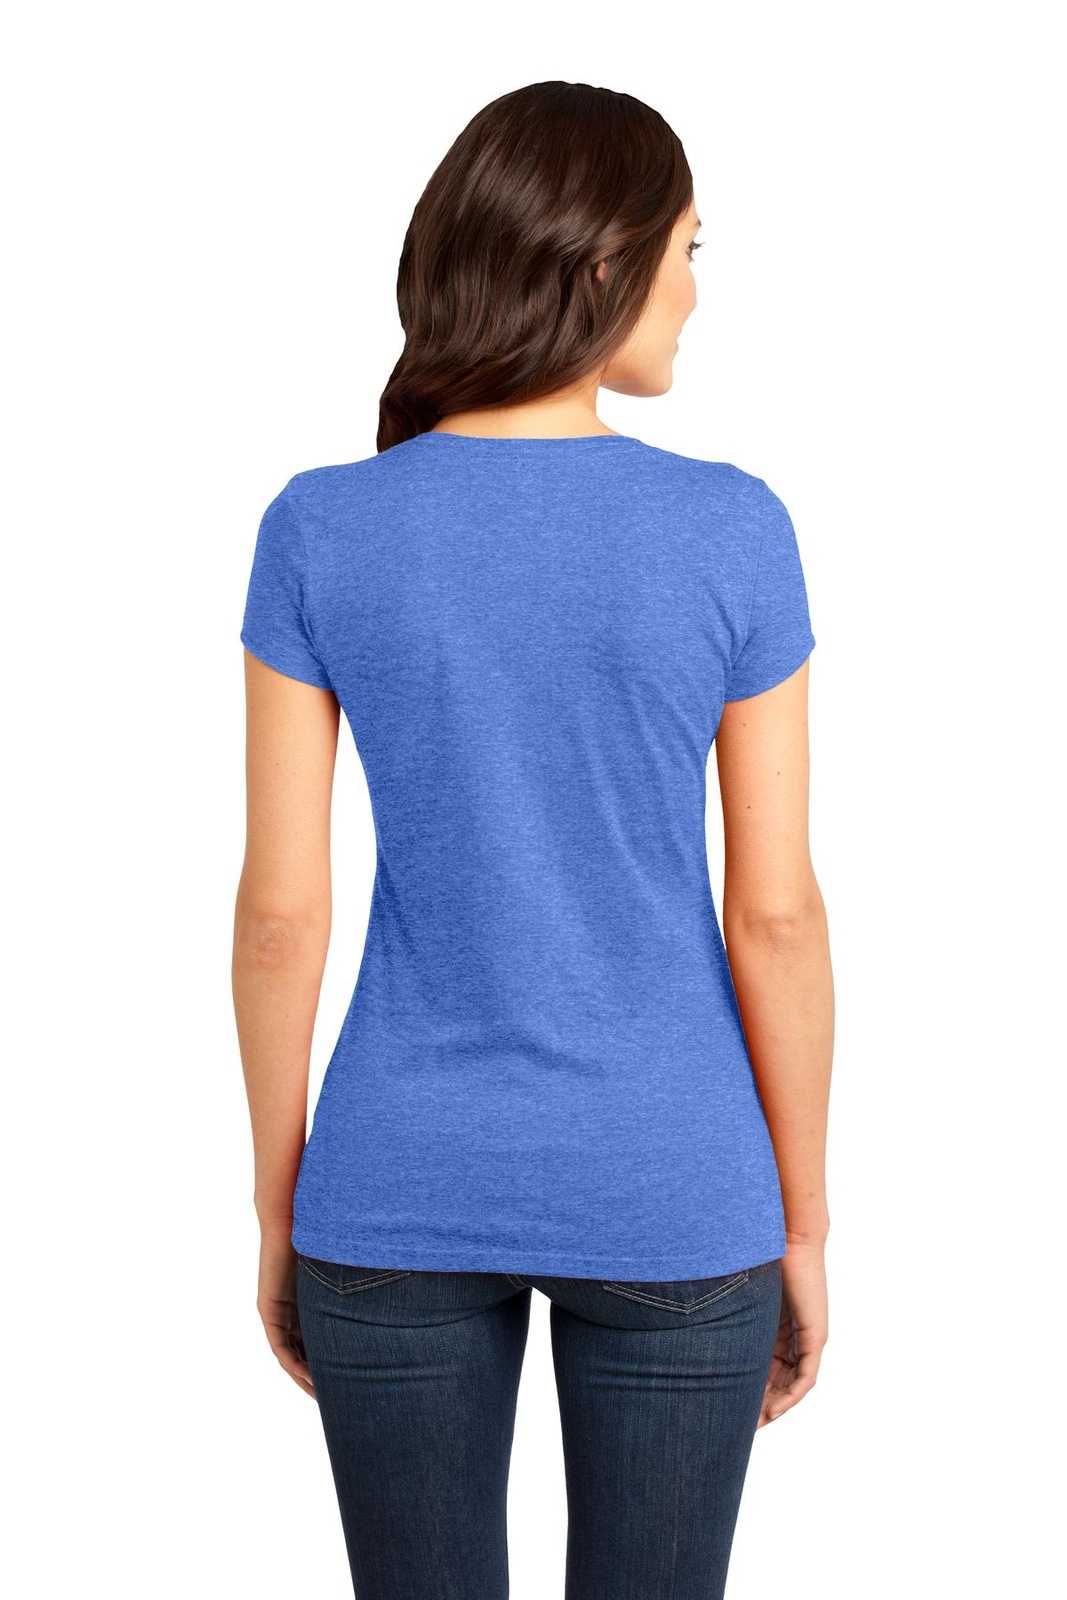 District DT6001 Women's Fitted Very Important Tee - Heathered Royal - HIT a Double - 1